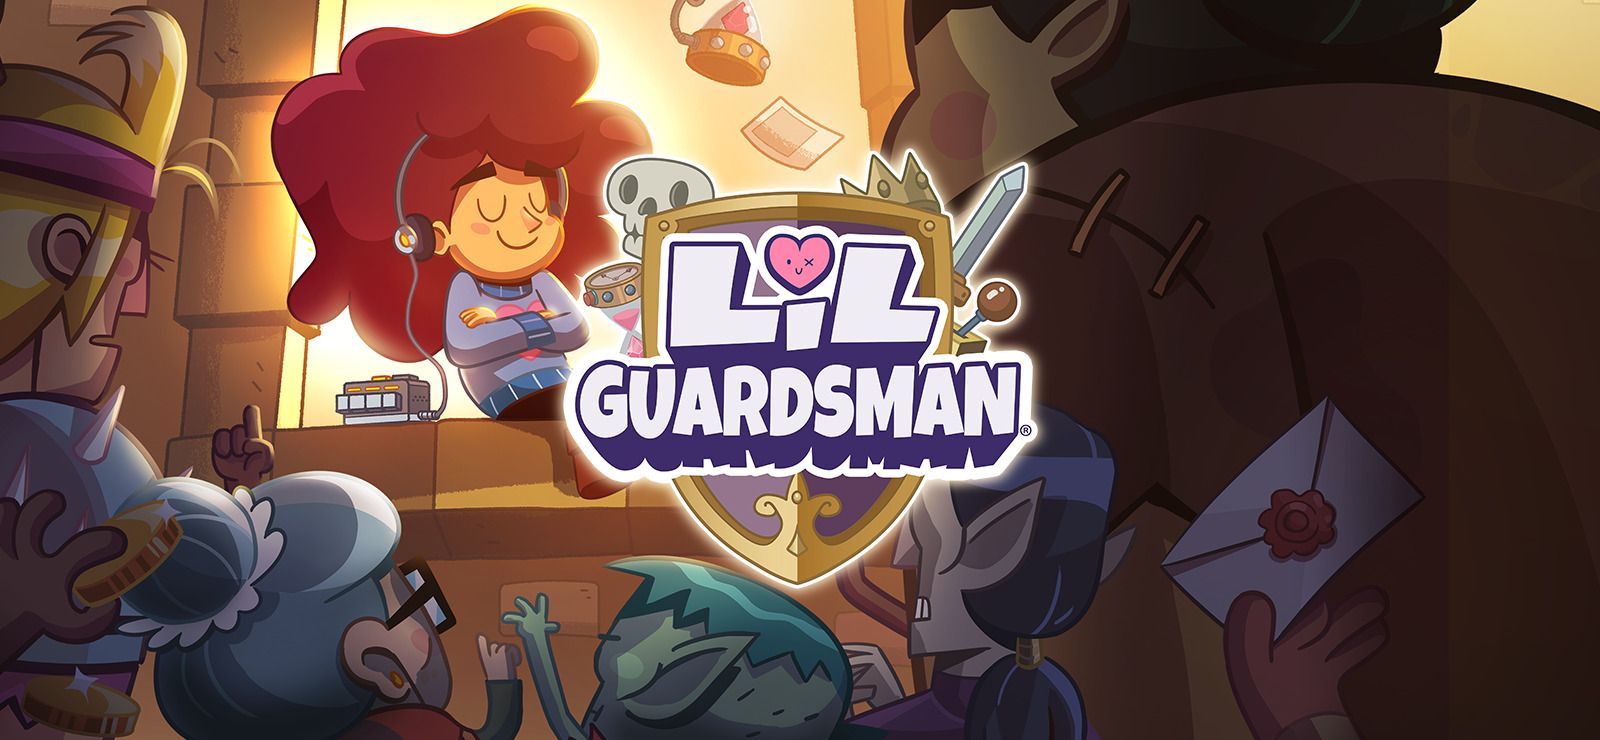 Lil' Guardsman: An Upcoming Deduction Adventure Where Choices Shape the Kingdom